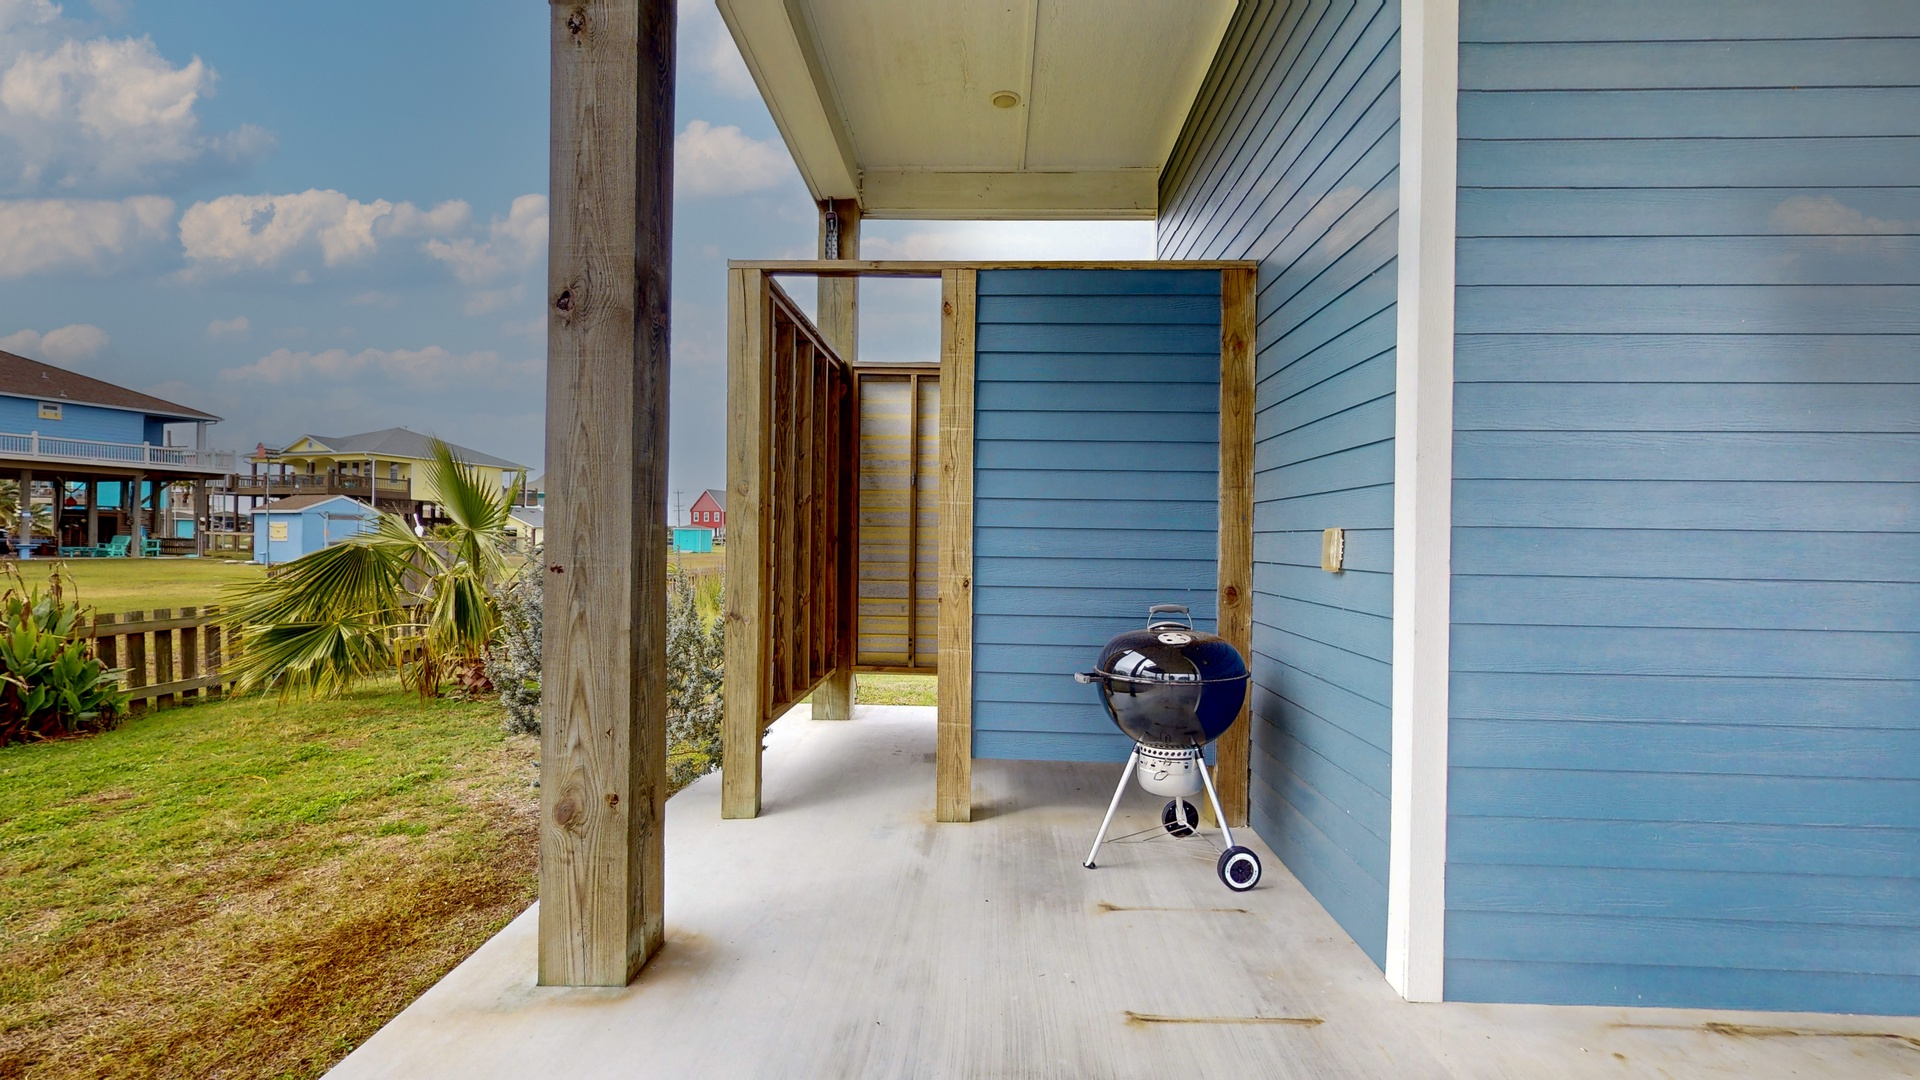 Outdoor Shower/ Charcoal Grill